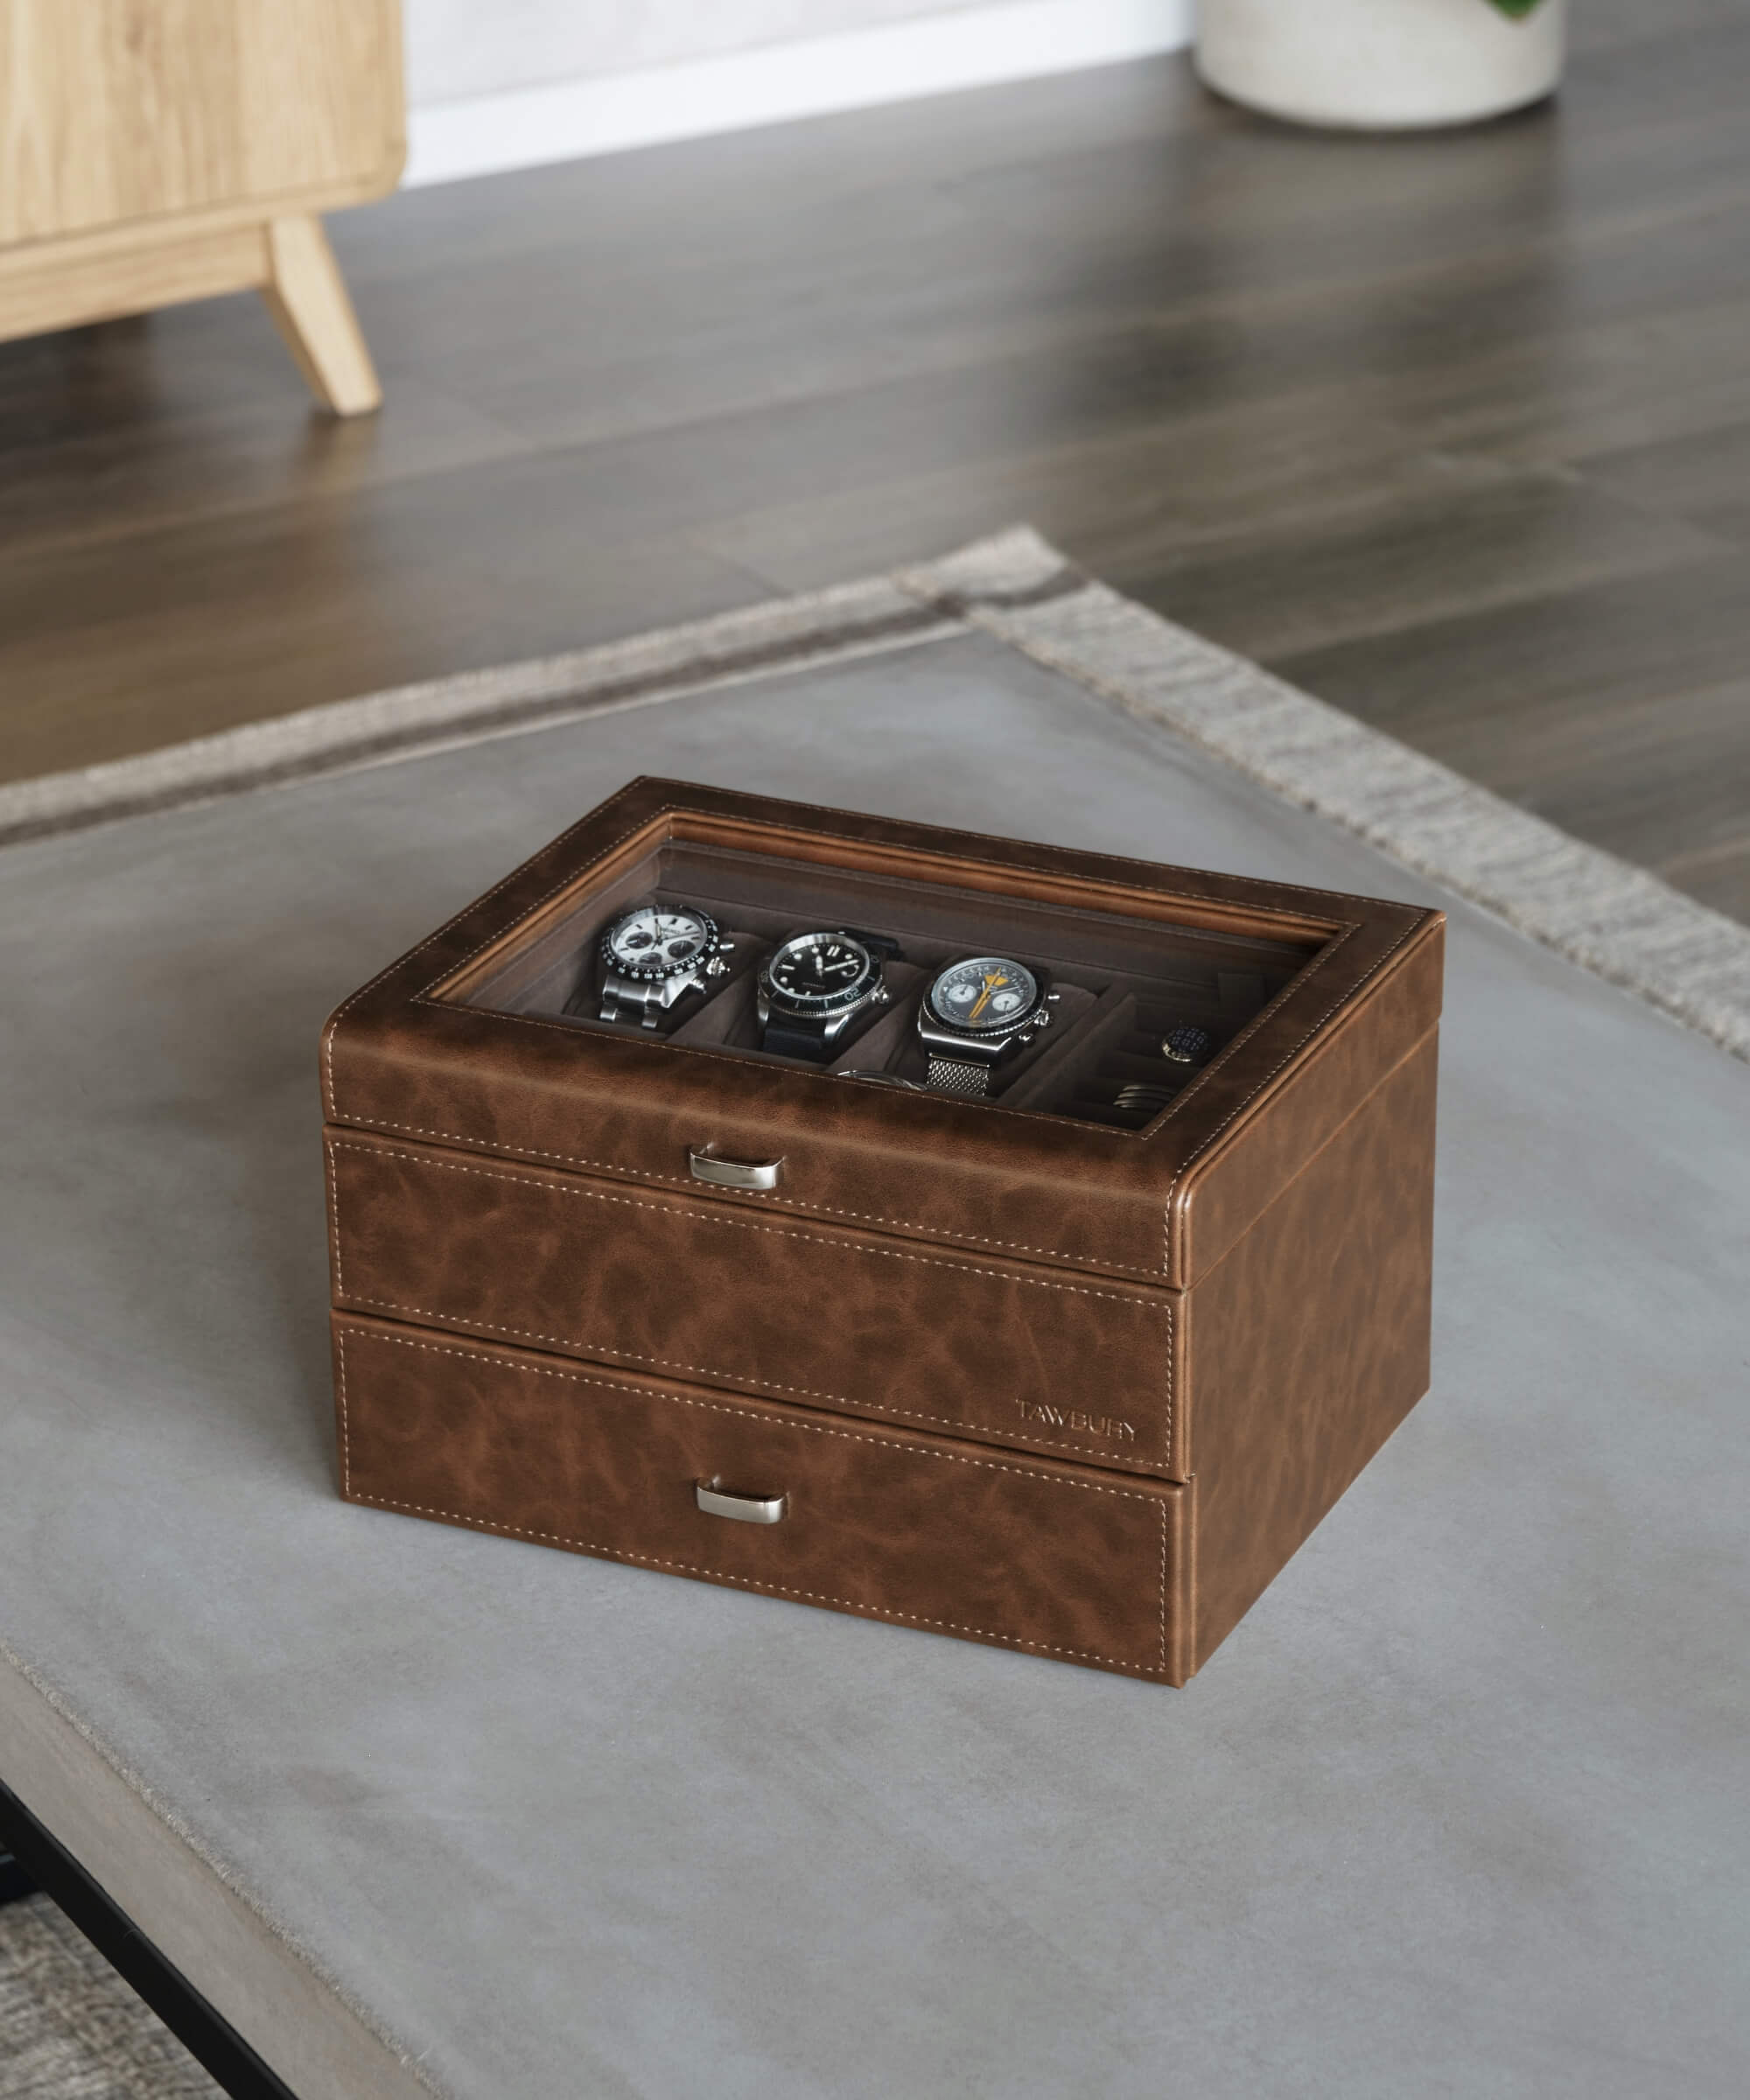 A TAWBURY Bayswater 6 Watch Jewellery Box - Brown, made of vegan leather, sitting on a table in a living room.